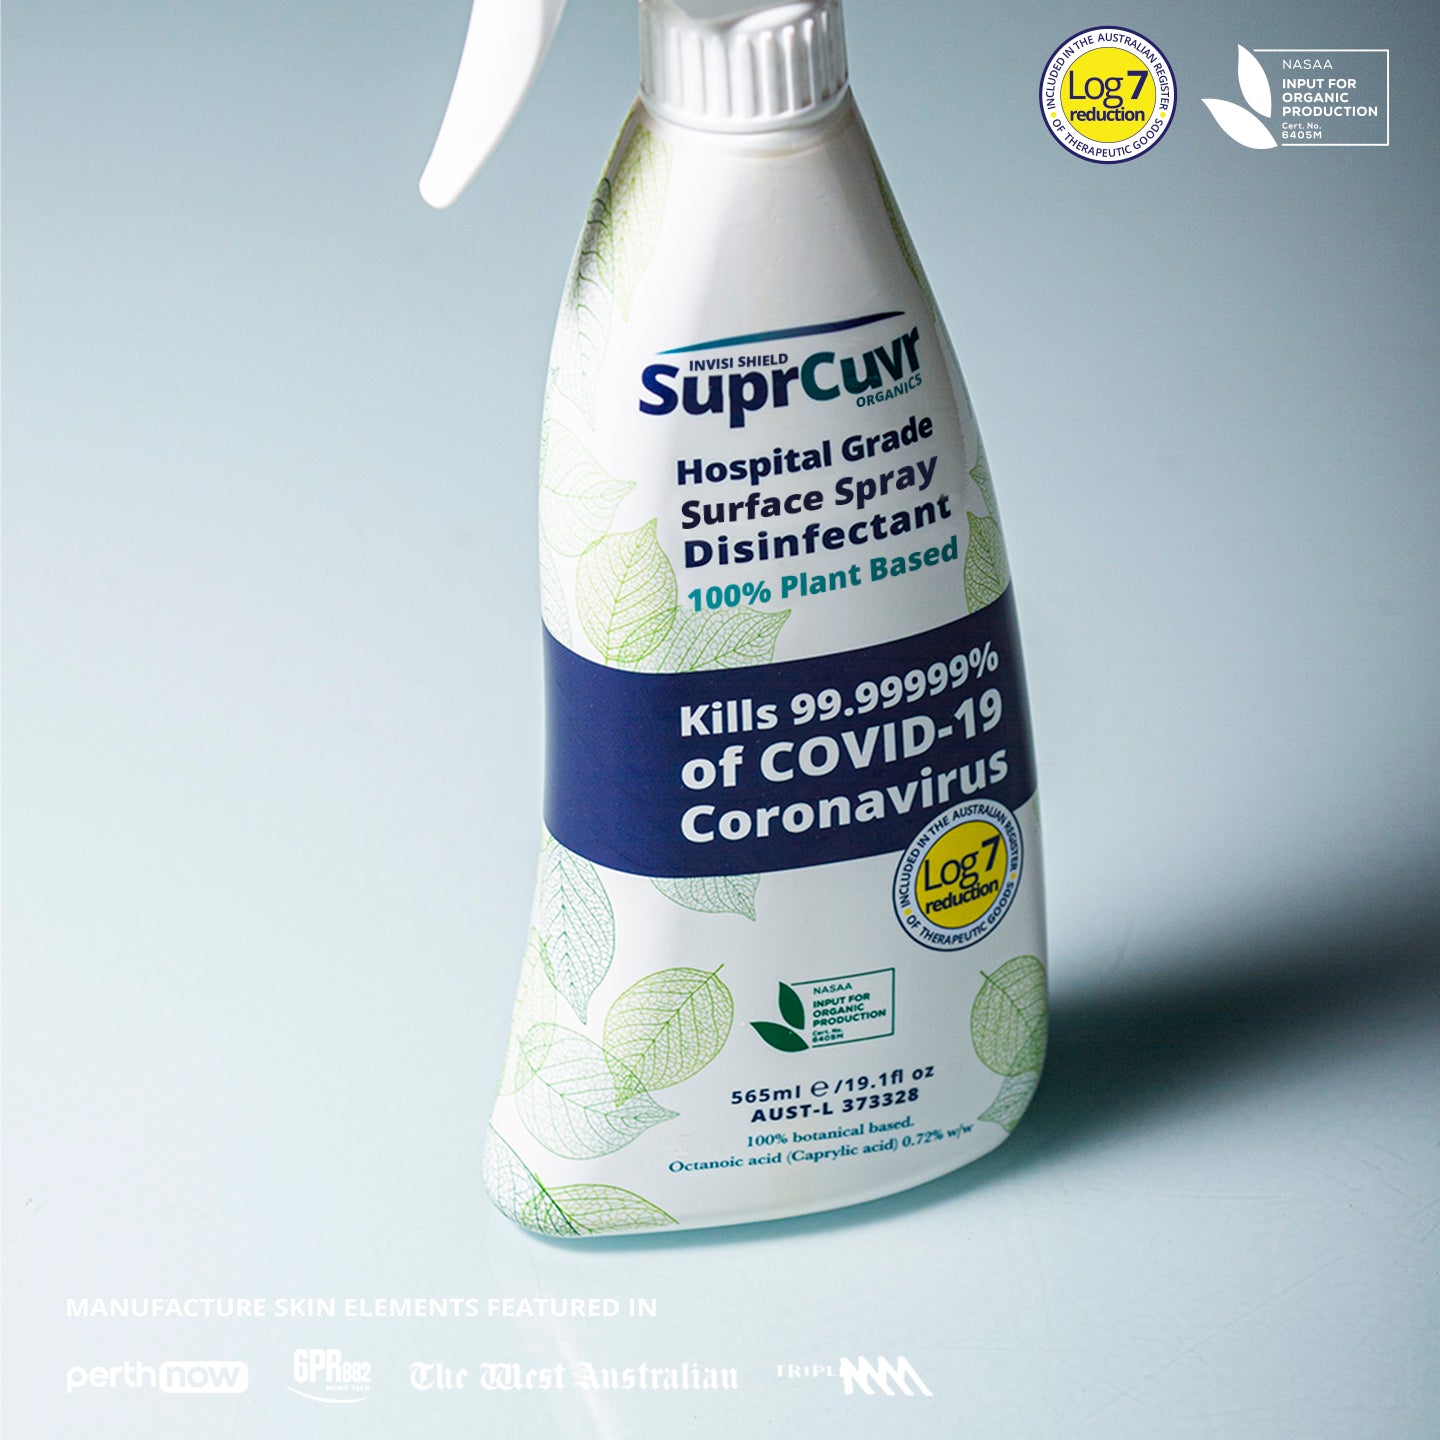 SuprCuvr Hospital Grade Disinfectant Surface Spray 565ml